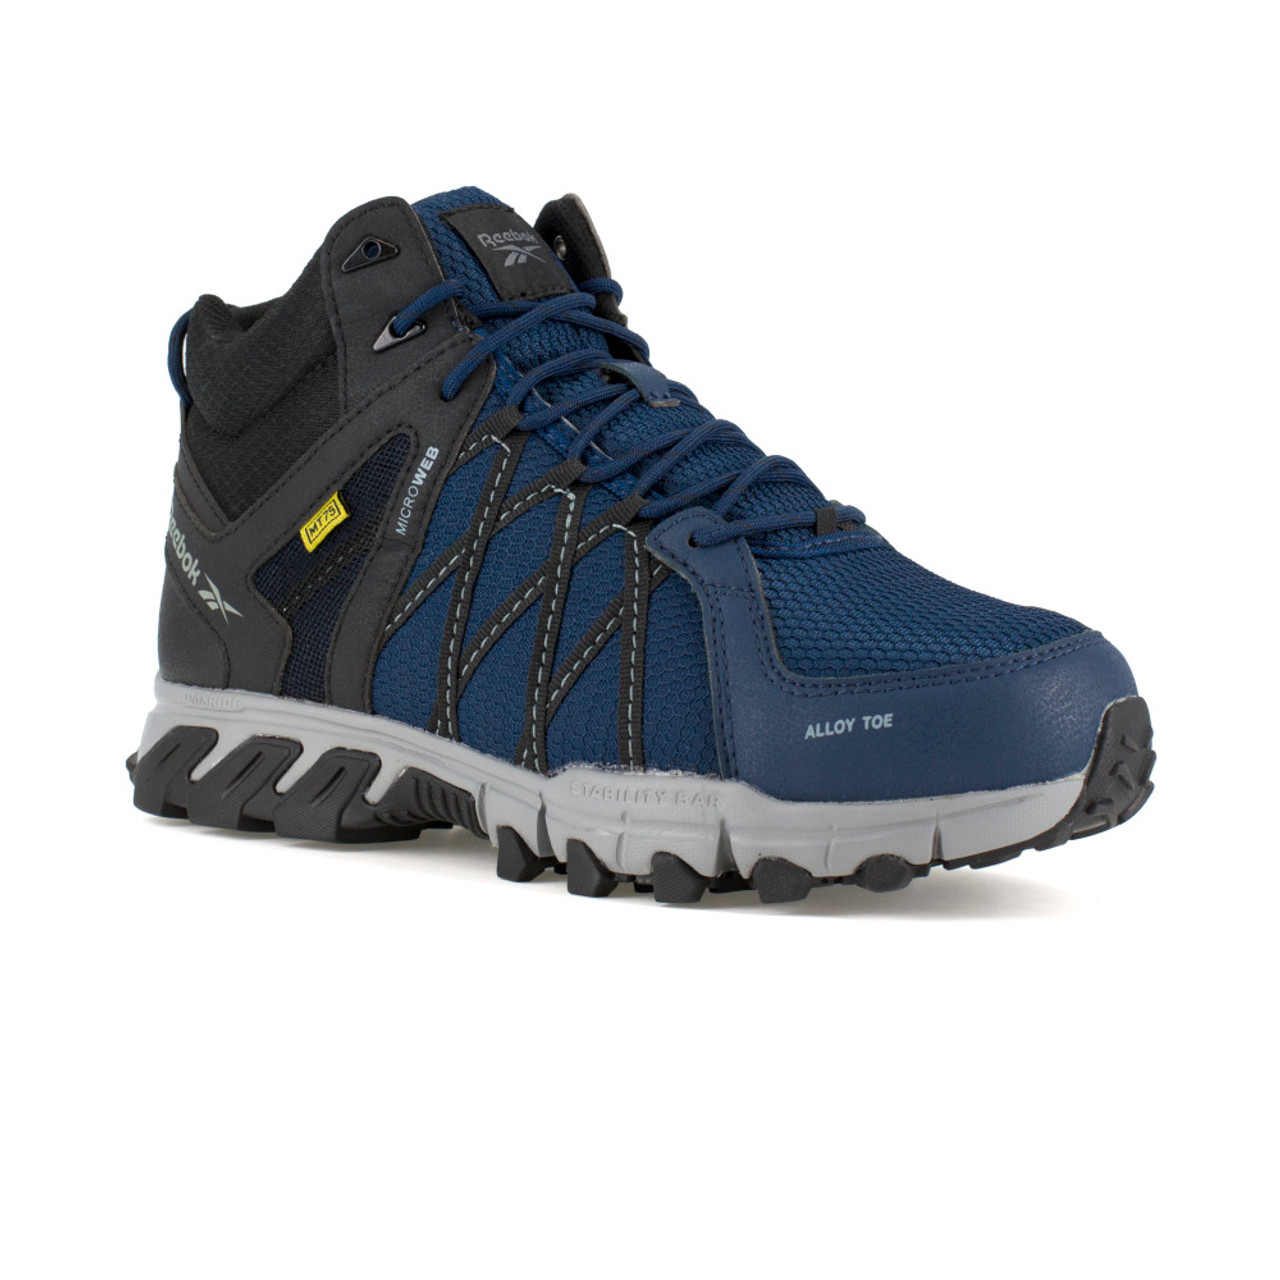 REEBOK TRAILGRIP WORK MEN'S ATHLETIC MID-CUT WITH CUSHGUARD™ BOOTS RB3400 